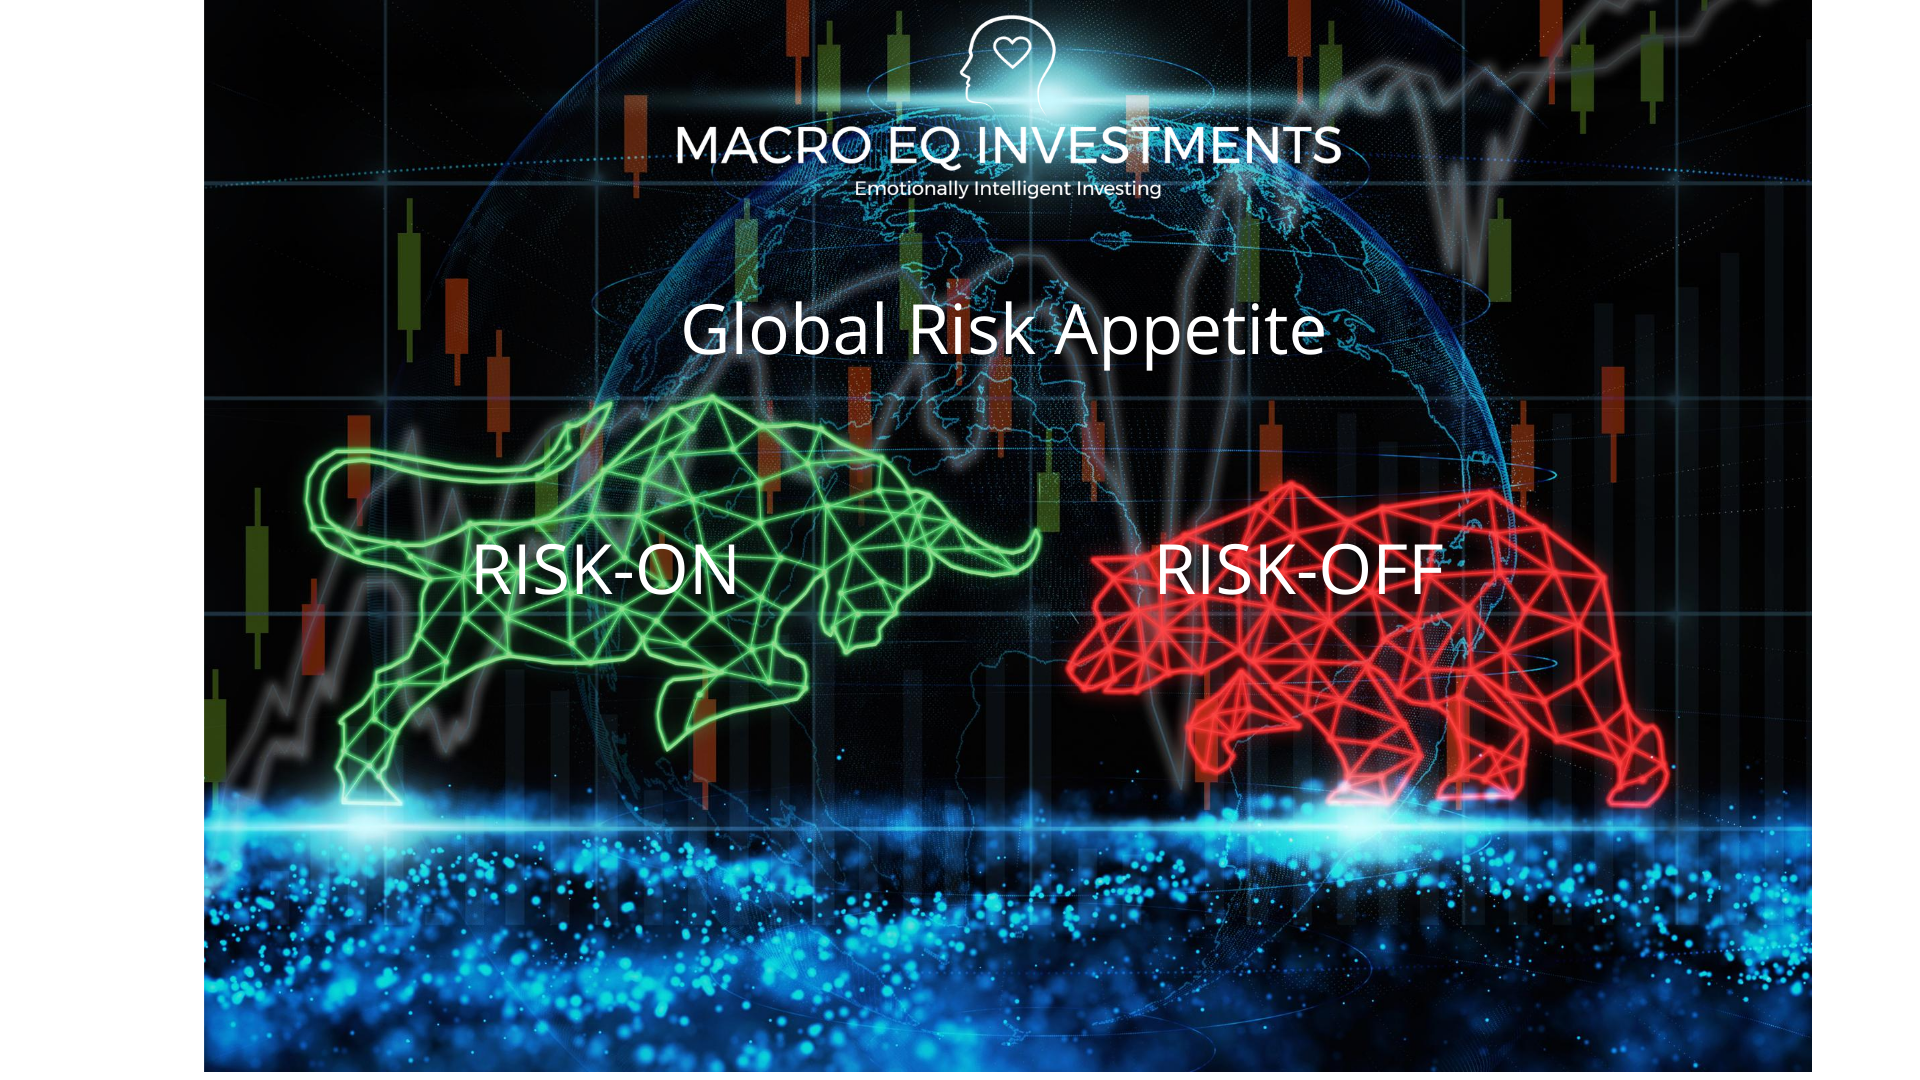 Global Risk Appetite by Macro EQ Investments.